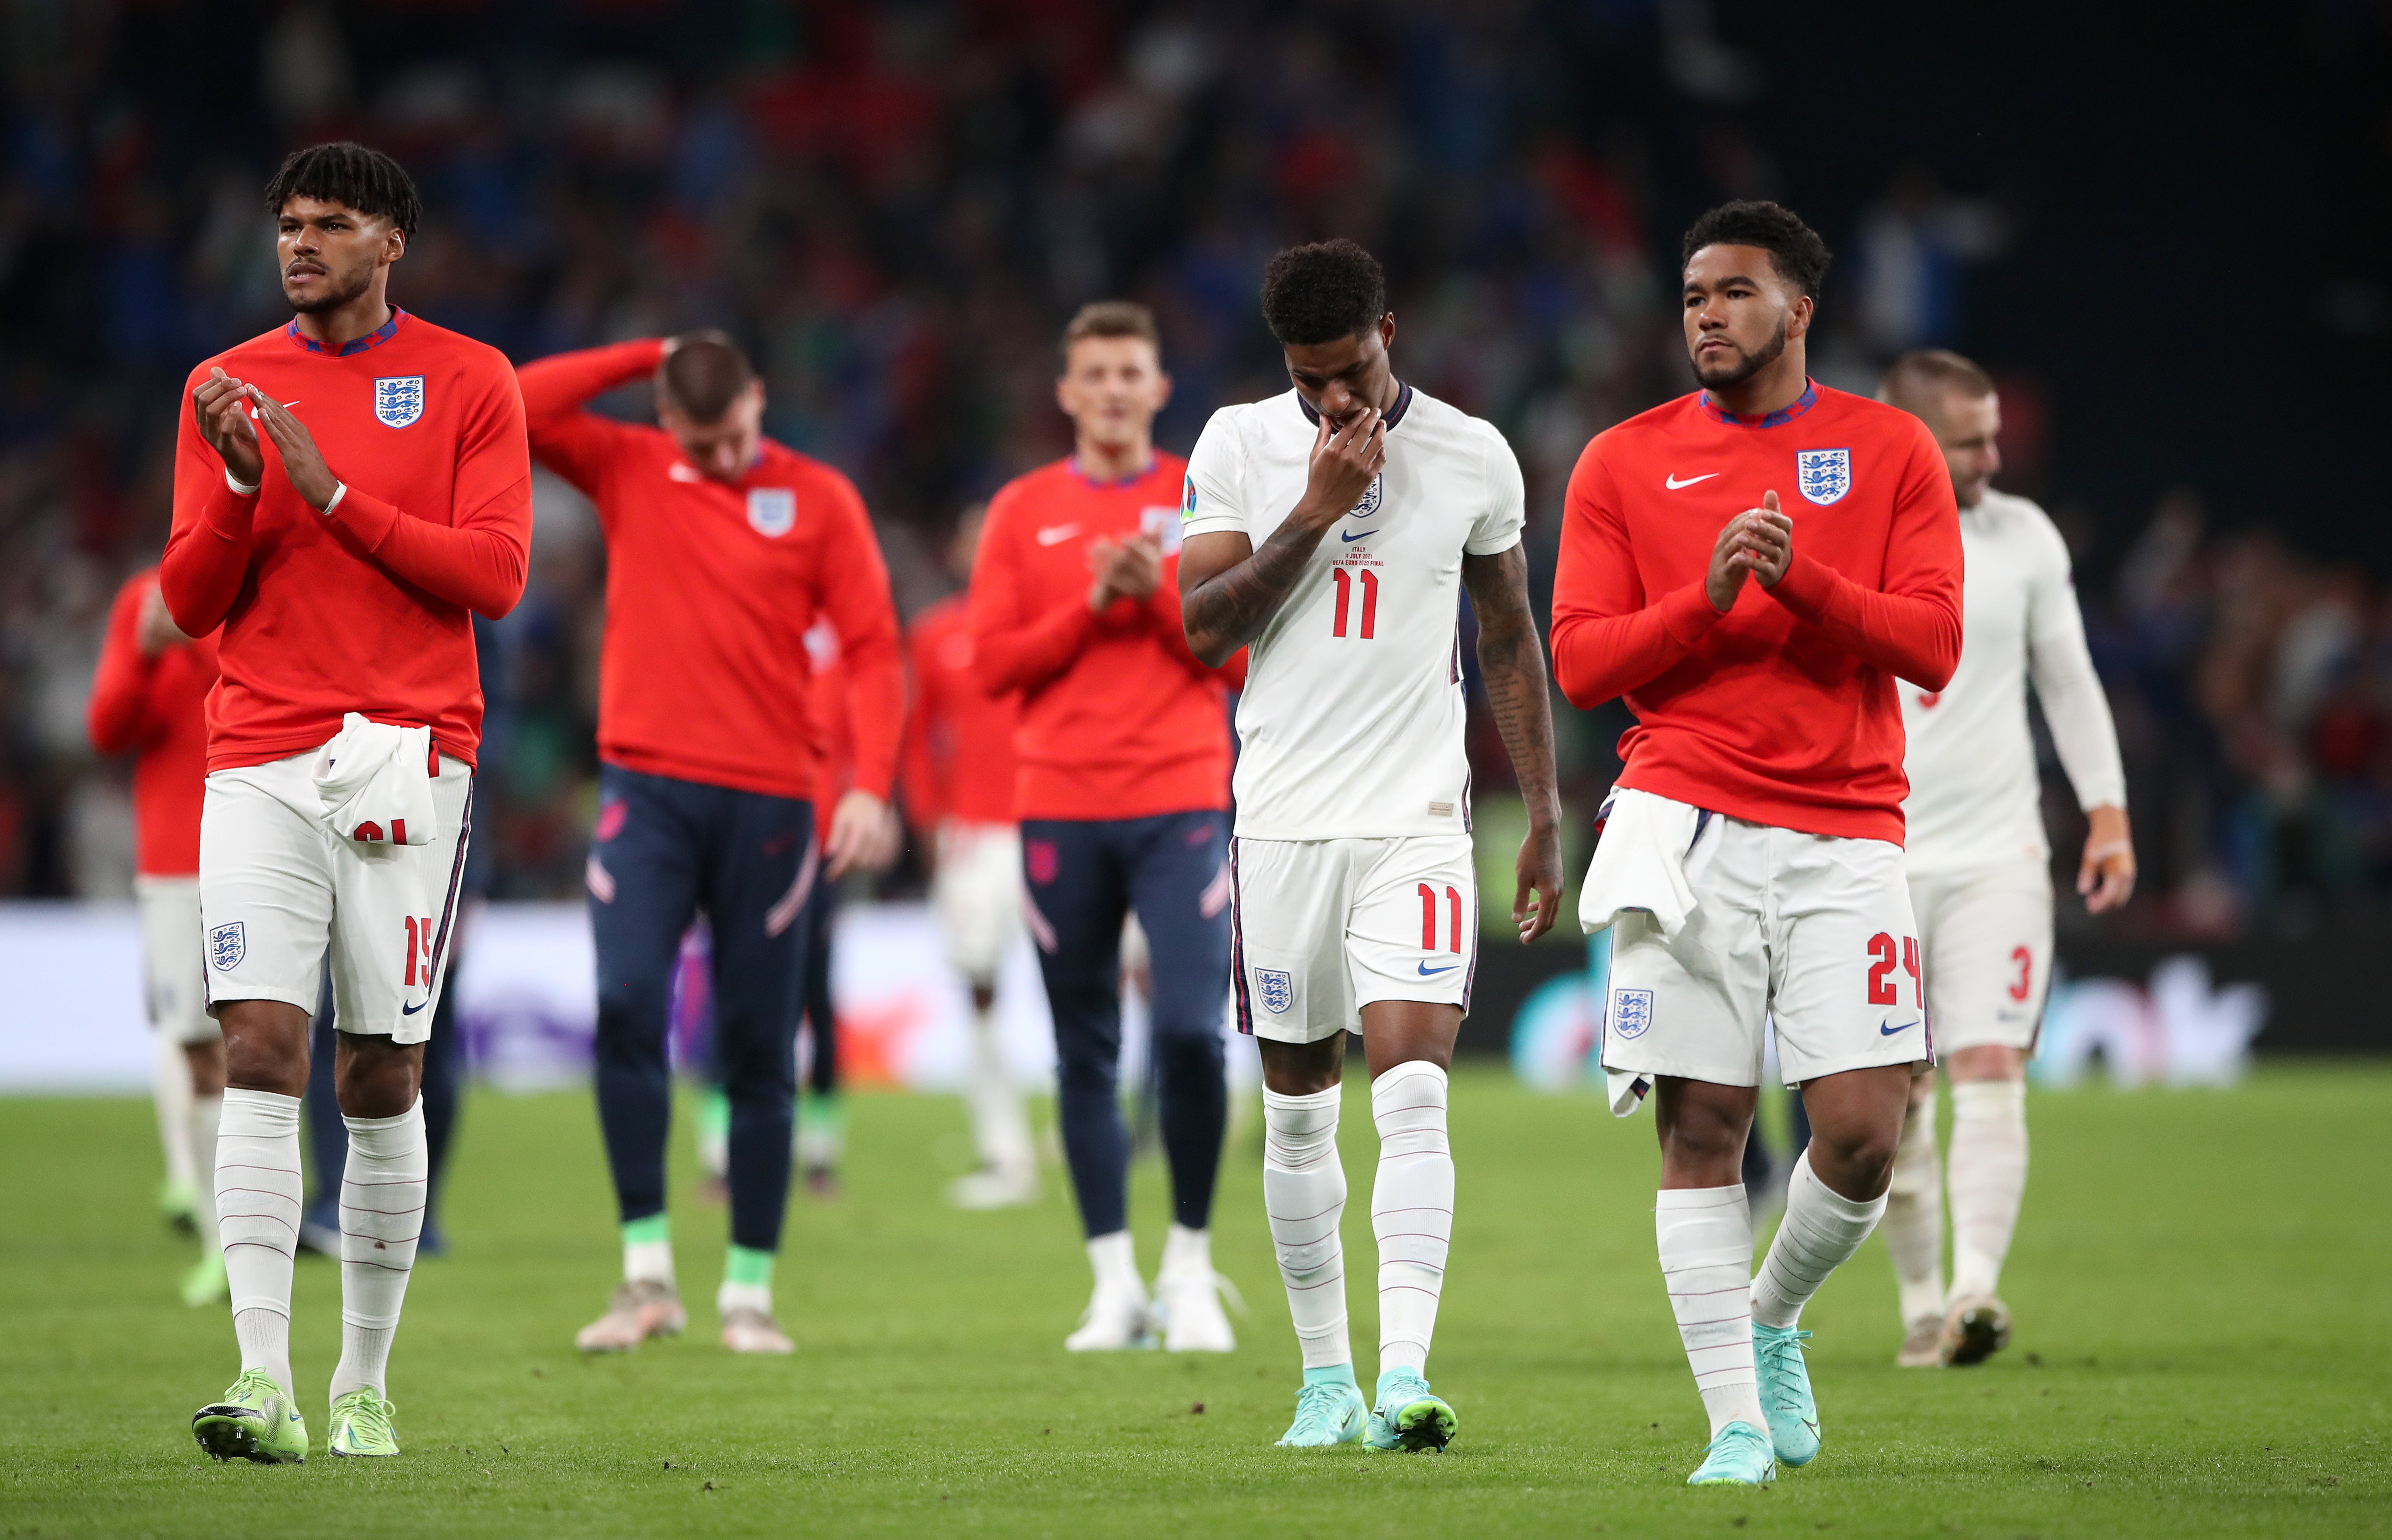 England’s defeat to Italy was welcomed by officials who were concerned about a group of 6,000 ticketless individuals storming the stadium (Nick Potts/PA)